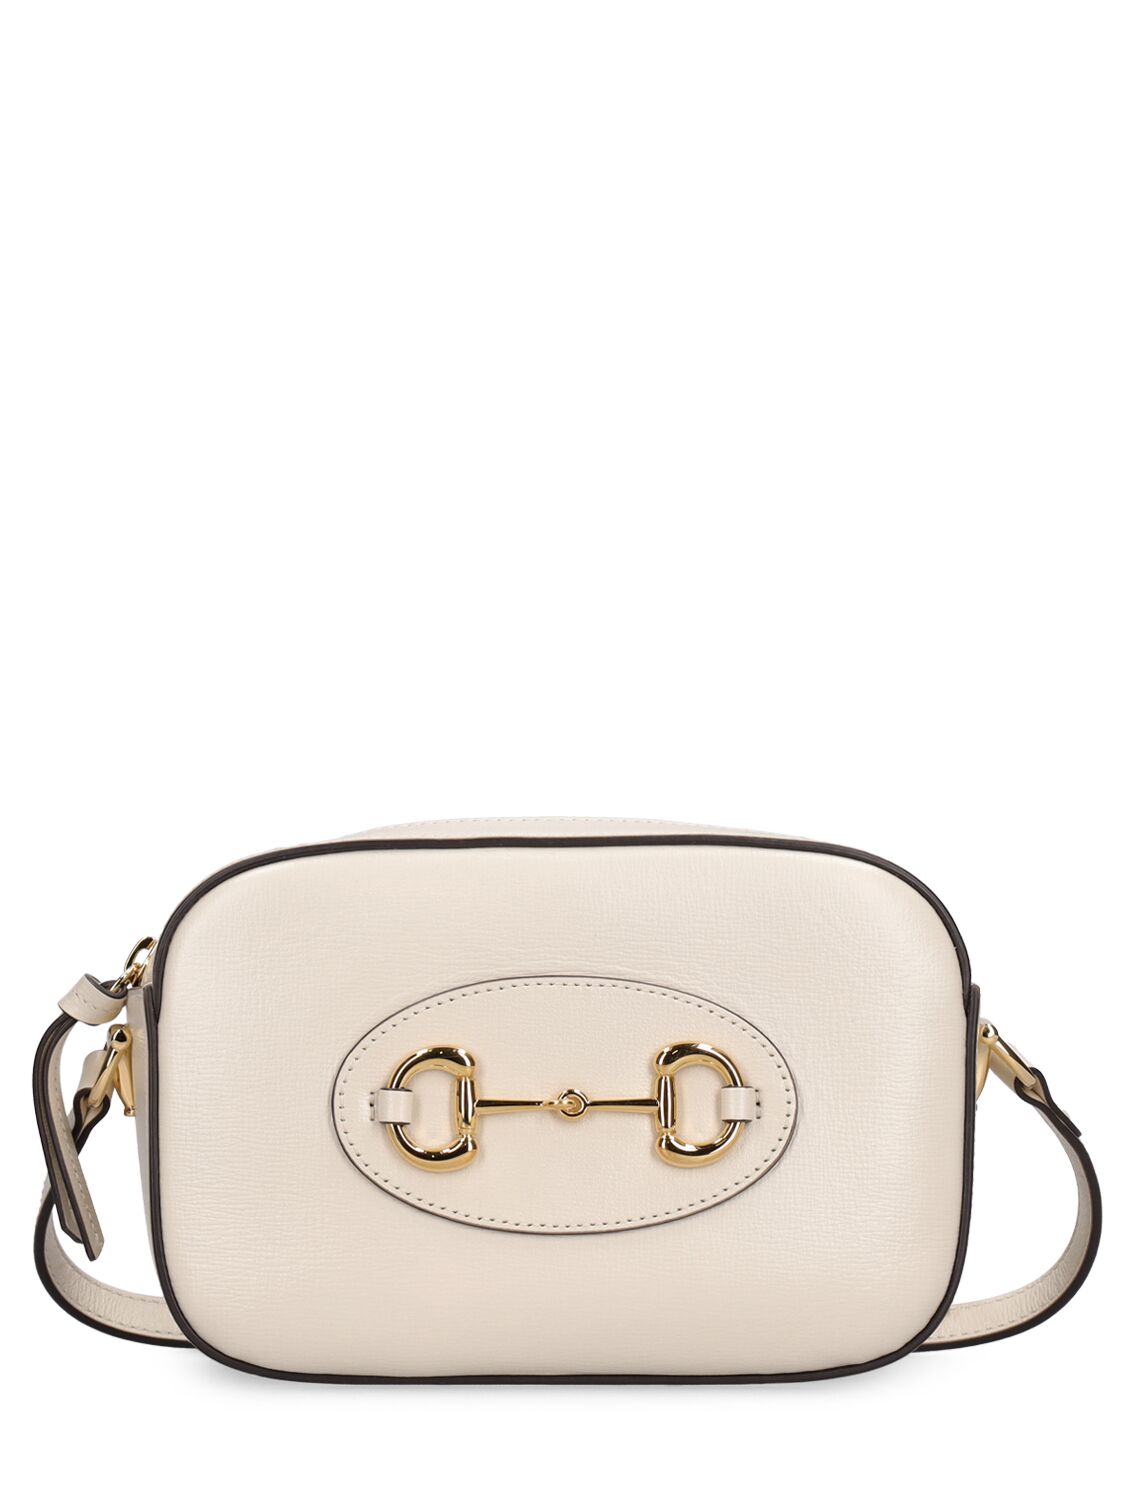 Gucci Small 1955 Horsebit Leather Shoulder Bag In White